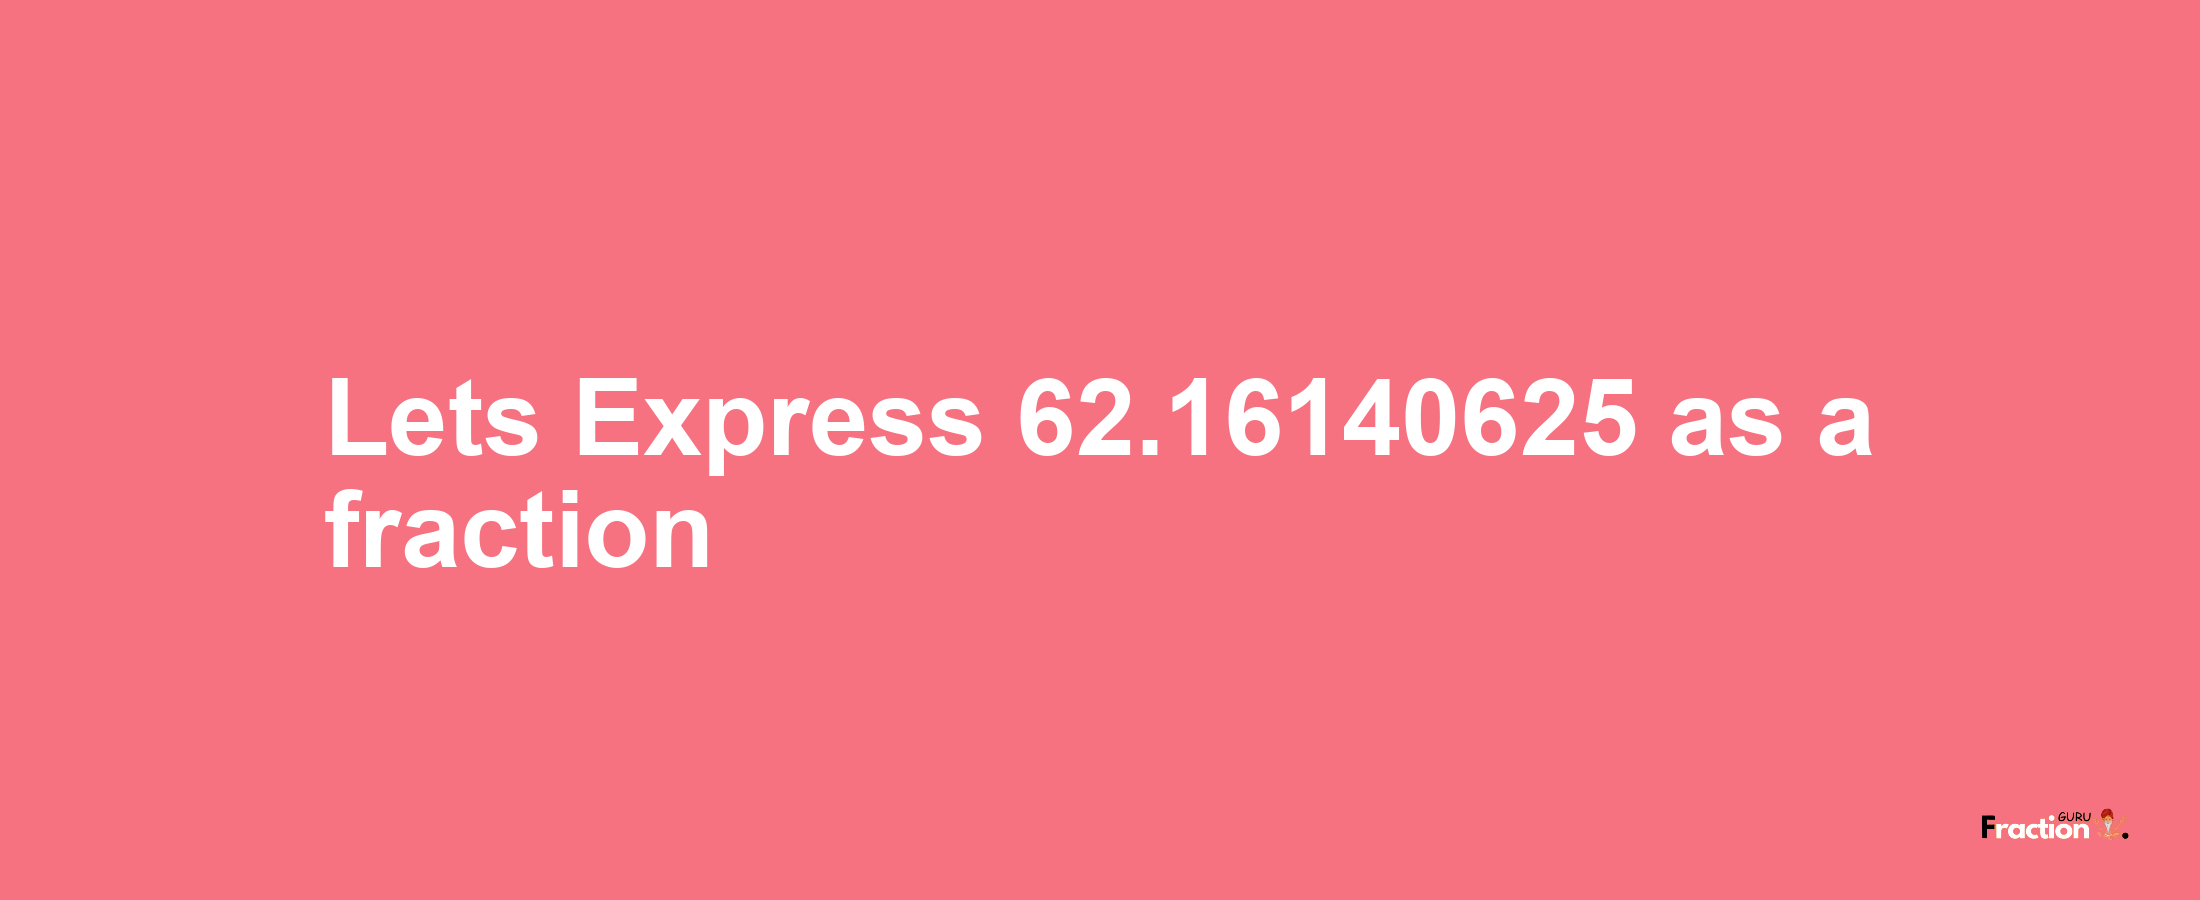 Lets Express 62.16140625 as afraction